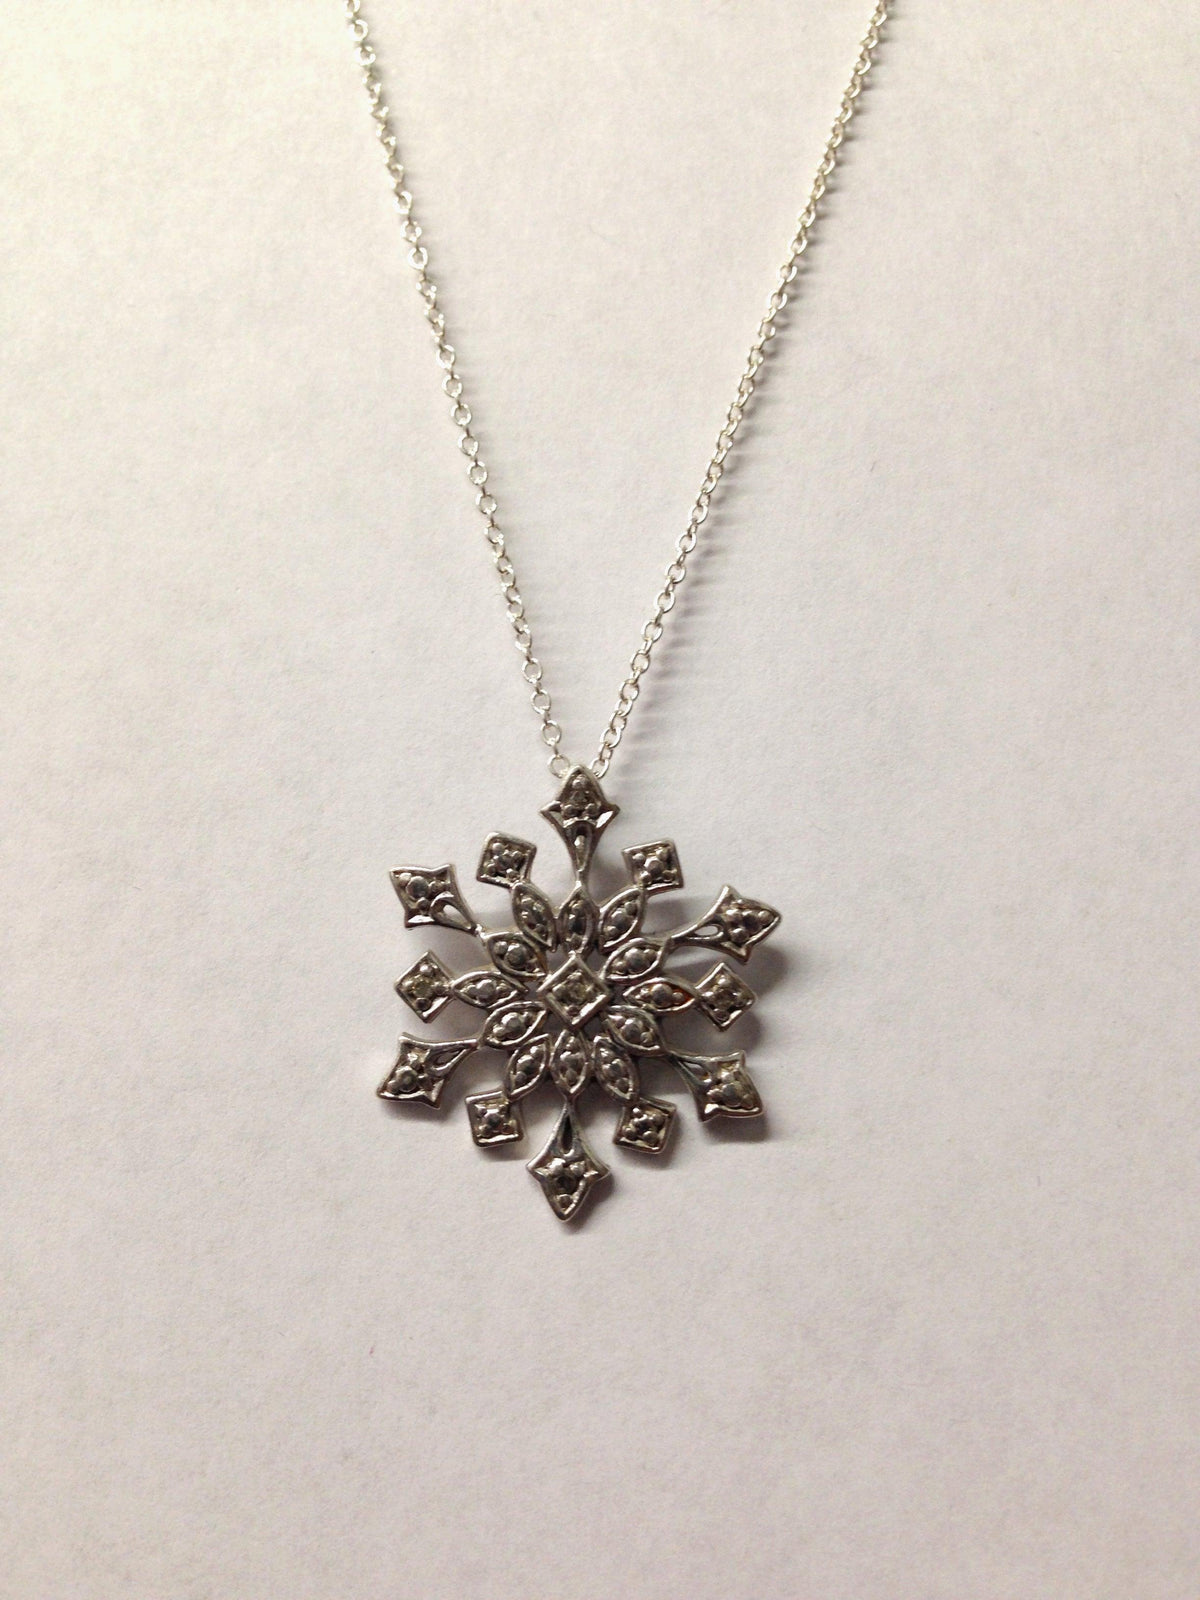 Snowflake Sterling Silver Necklace - Hers and His Treasures